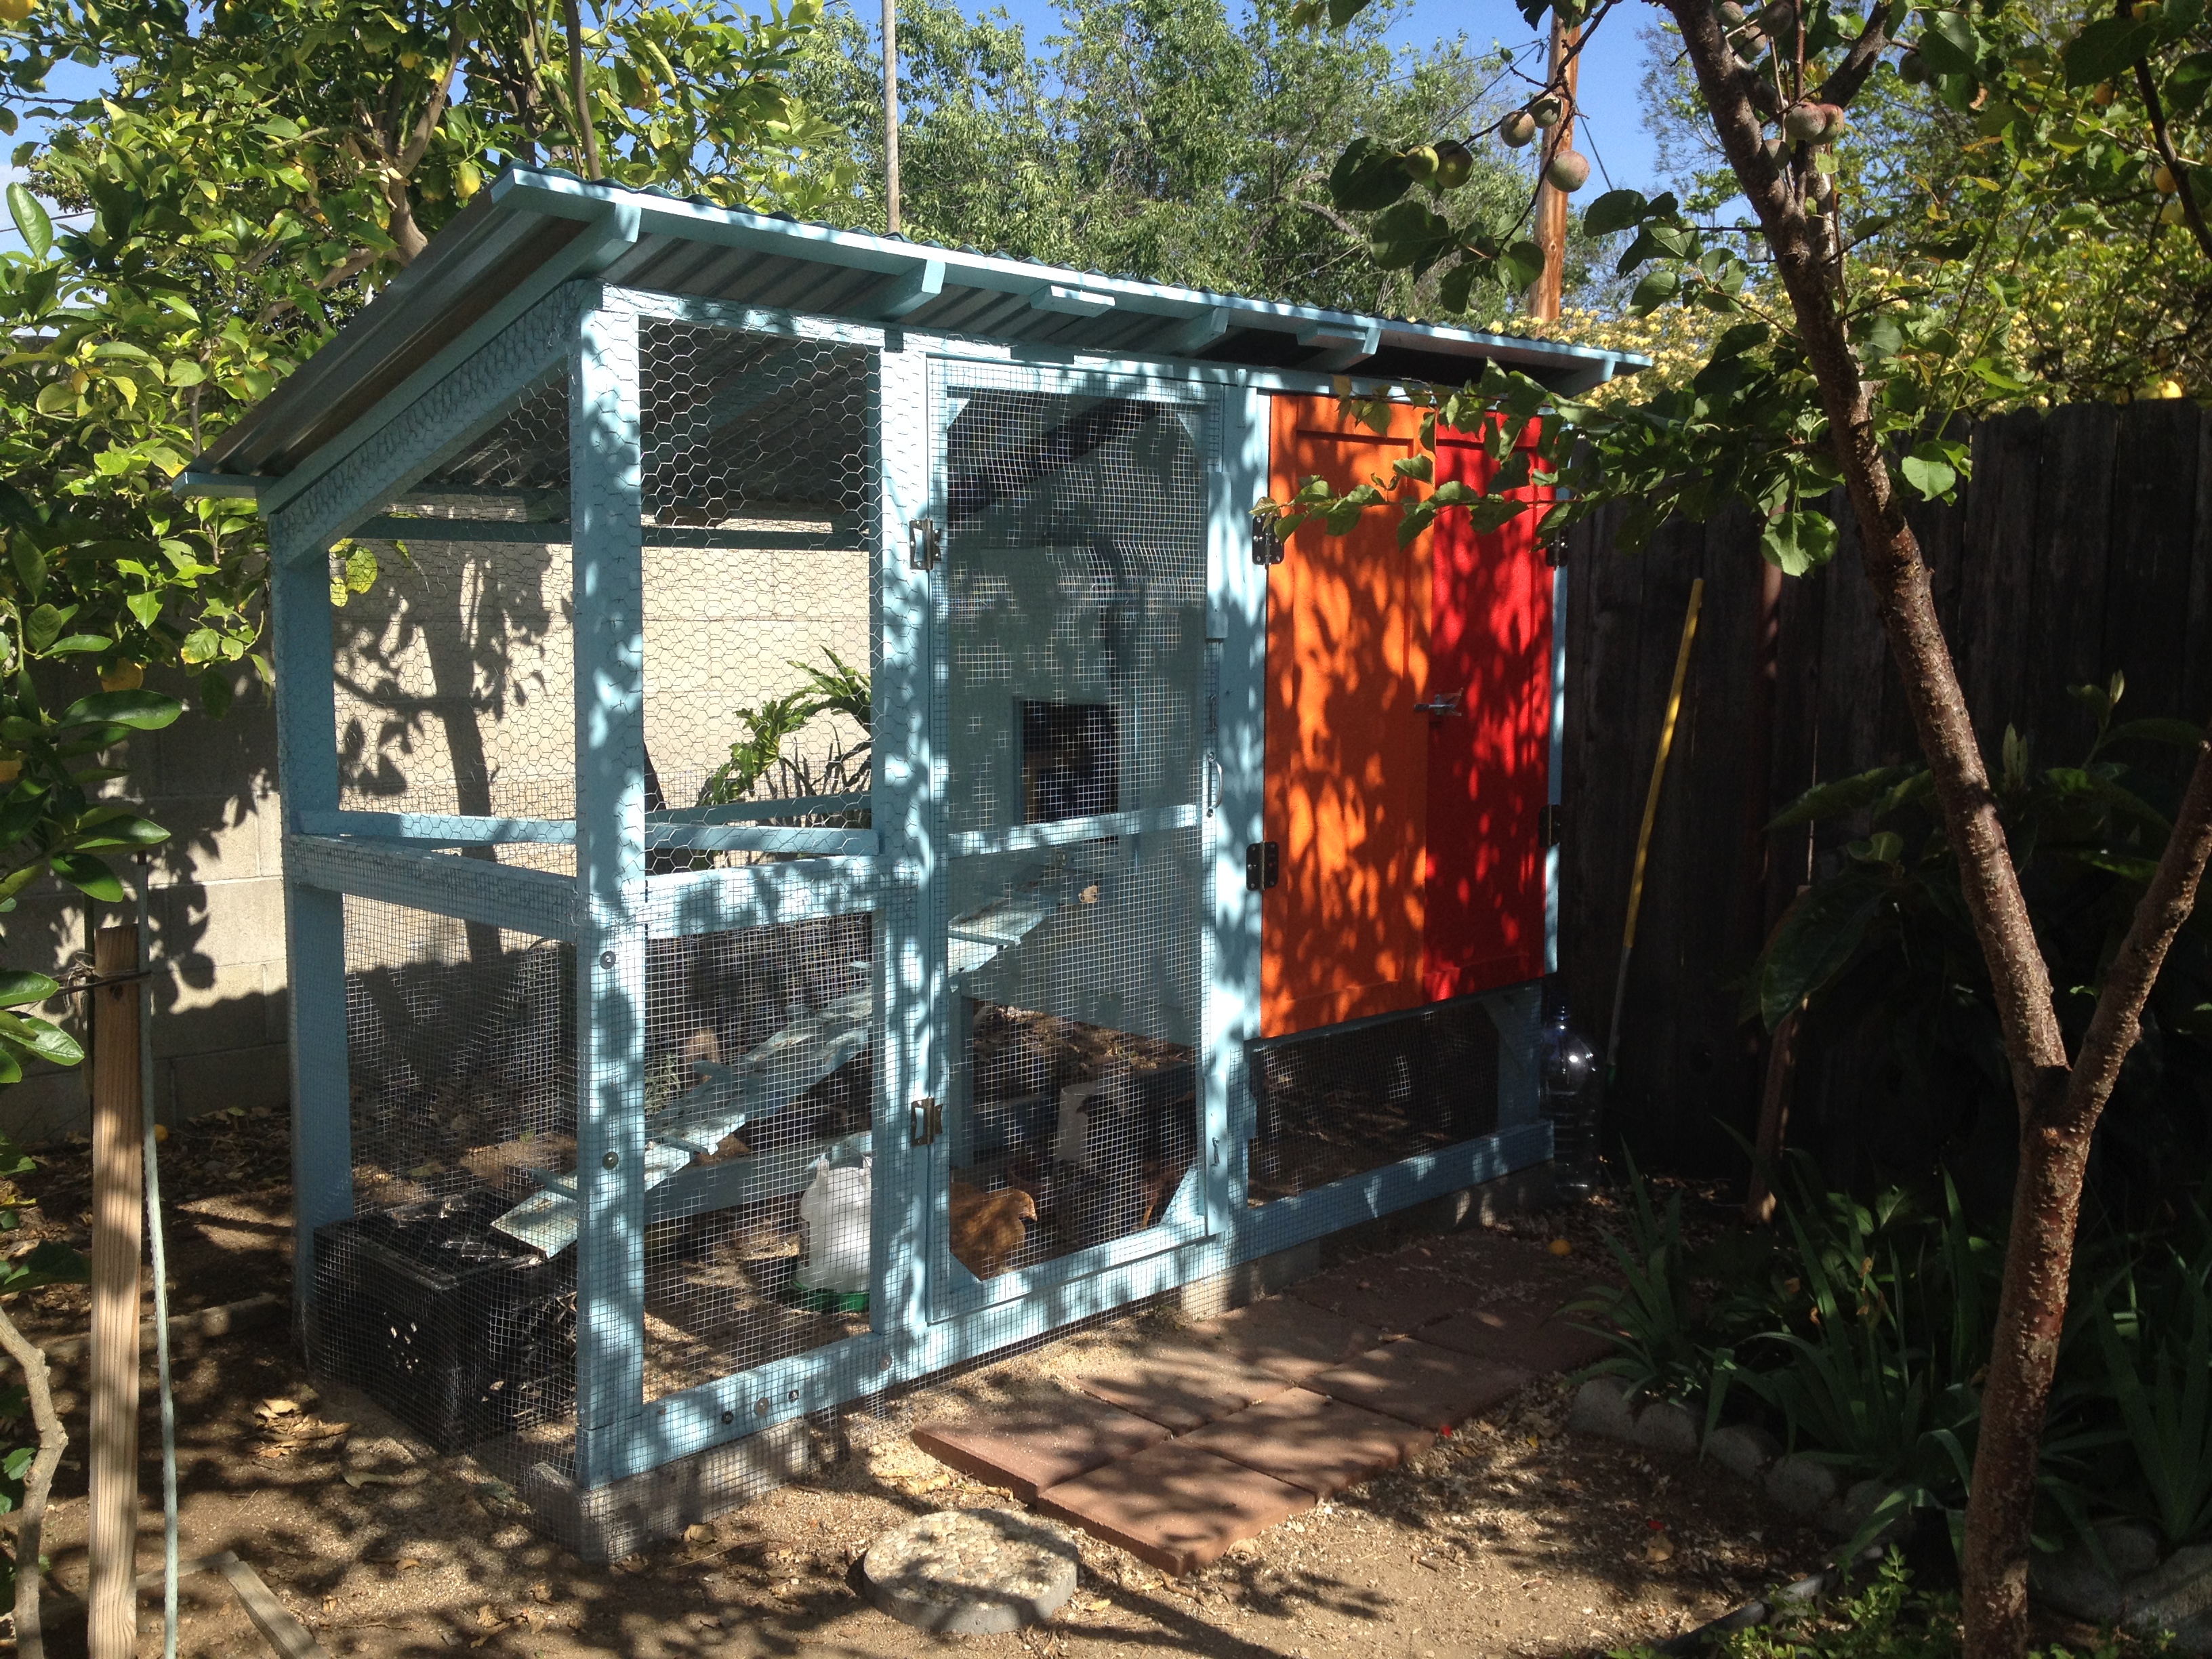 The finished coop and run in sun-dappled light.